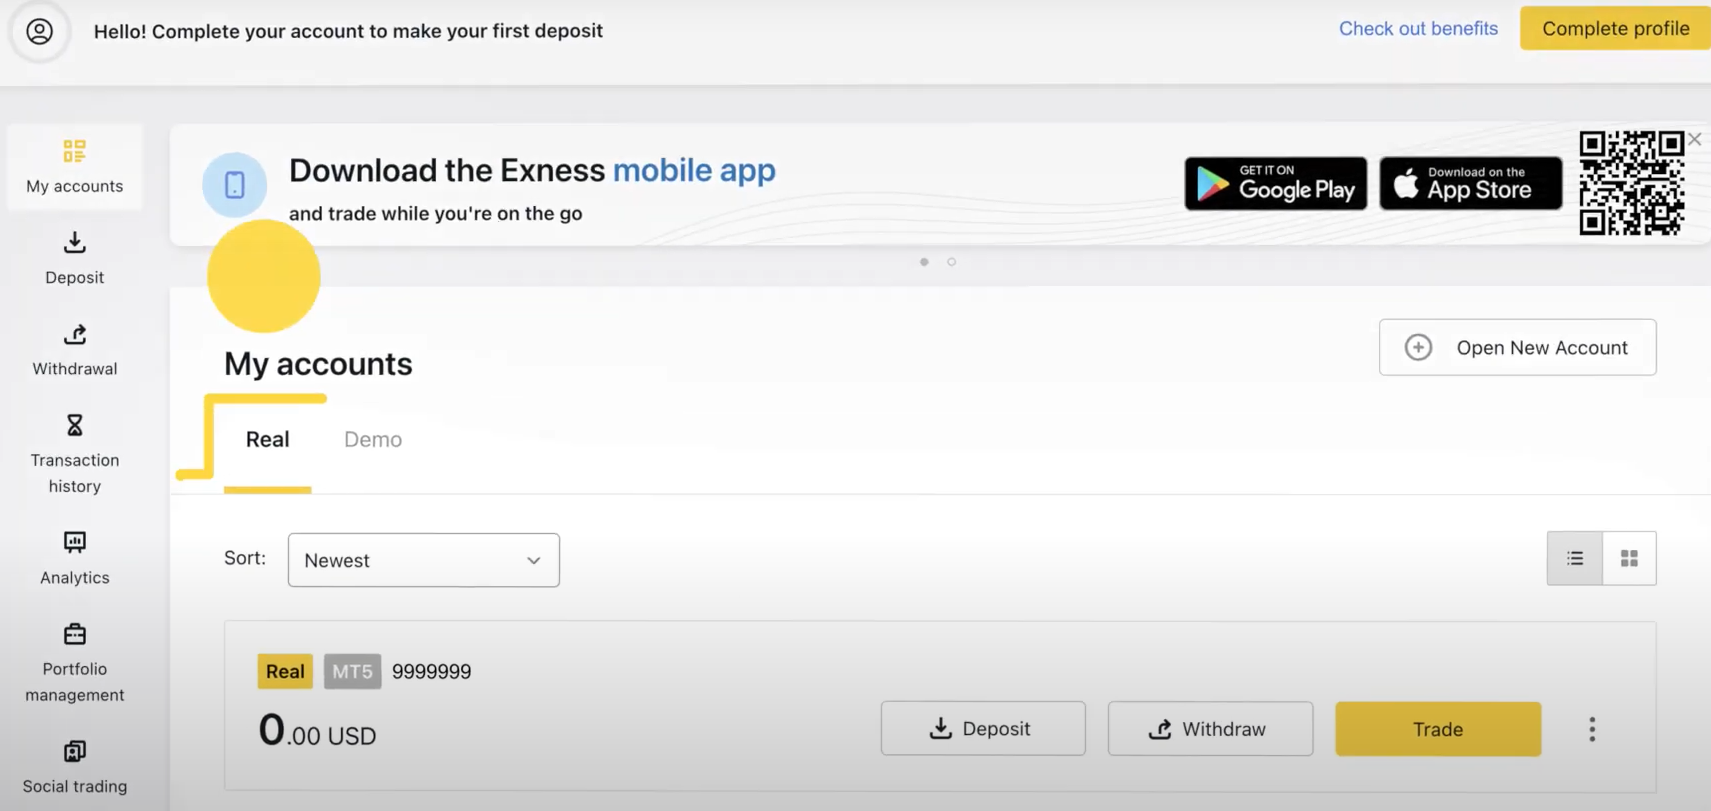 Top 10 Exness Apk Download Accounts To Follow On Twitter